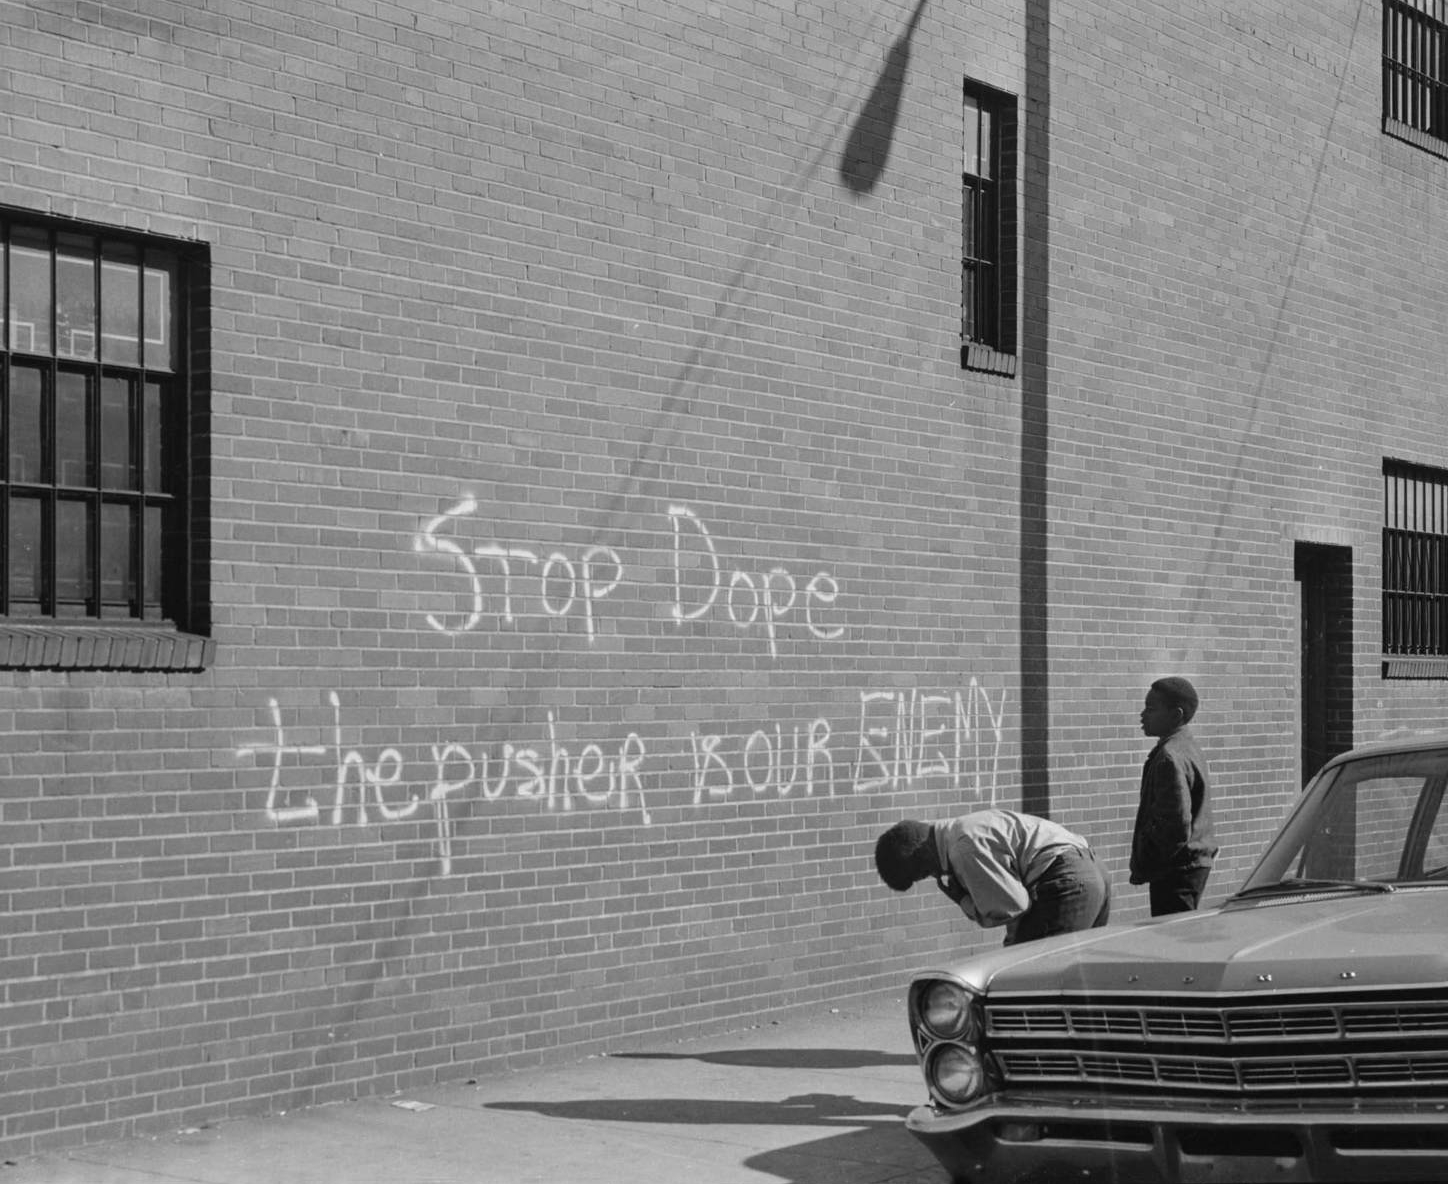 Photography by Charles Teenie Harris of a chalk on brick wall that says Stop dope the pusher is our enemy